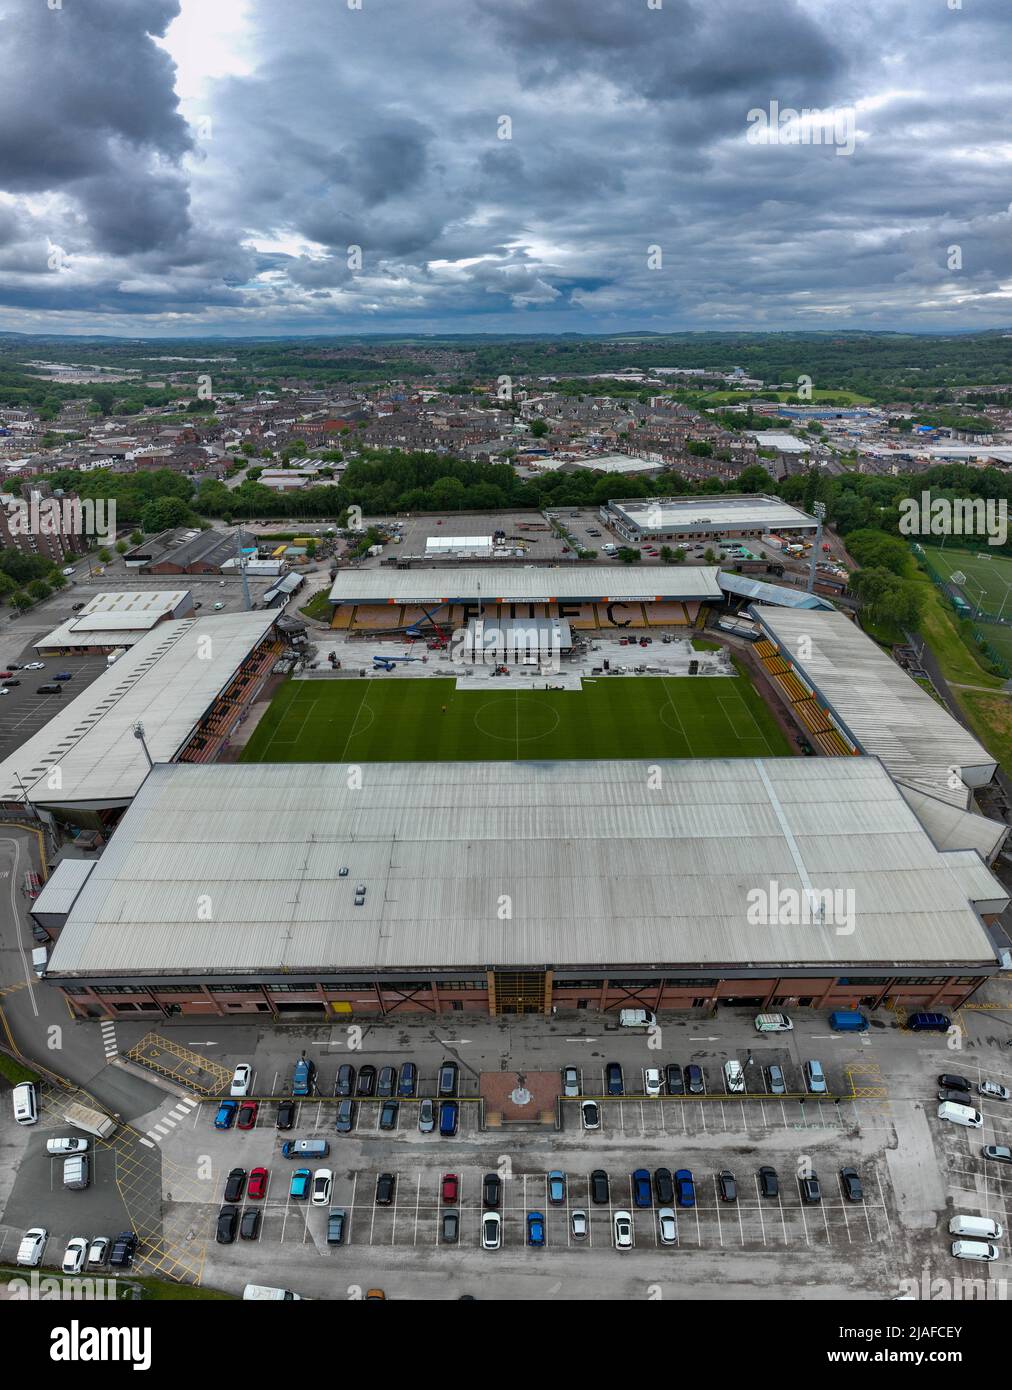 Vale Park , Robbie Williams Homecoming Concert in Burslem Stoke on Trent Aerial Drone View of the Stage being Built and local area Port Vale FC Stock Photo